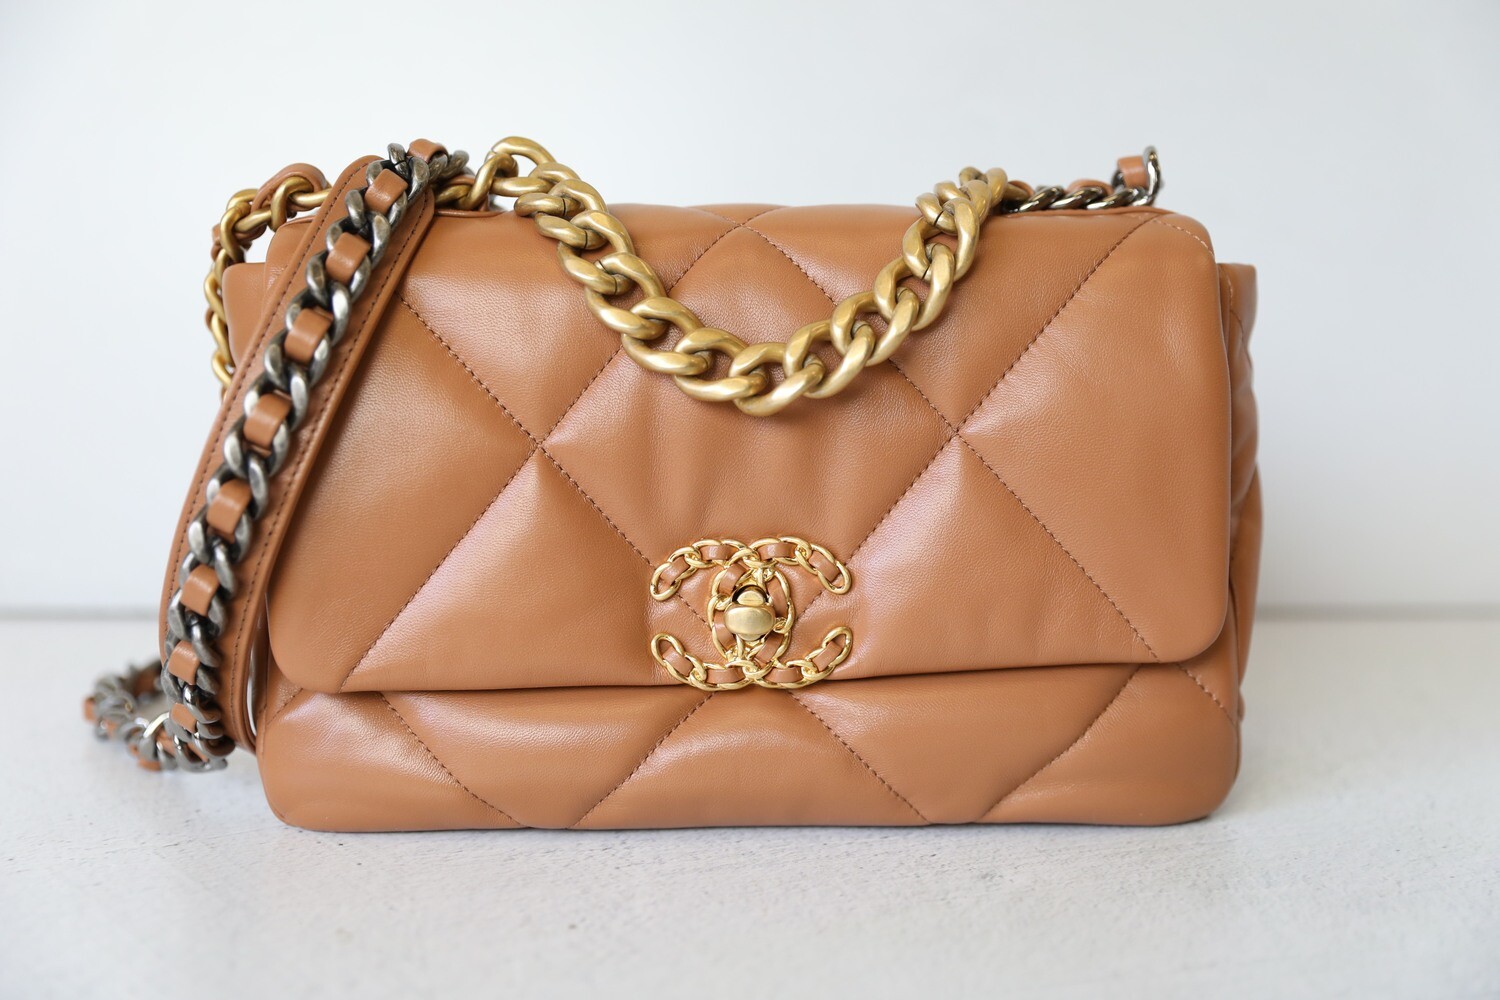 Chanel 19 Small, Caramel Brown Lambskin, Preowned in Dustbag WA001